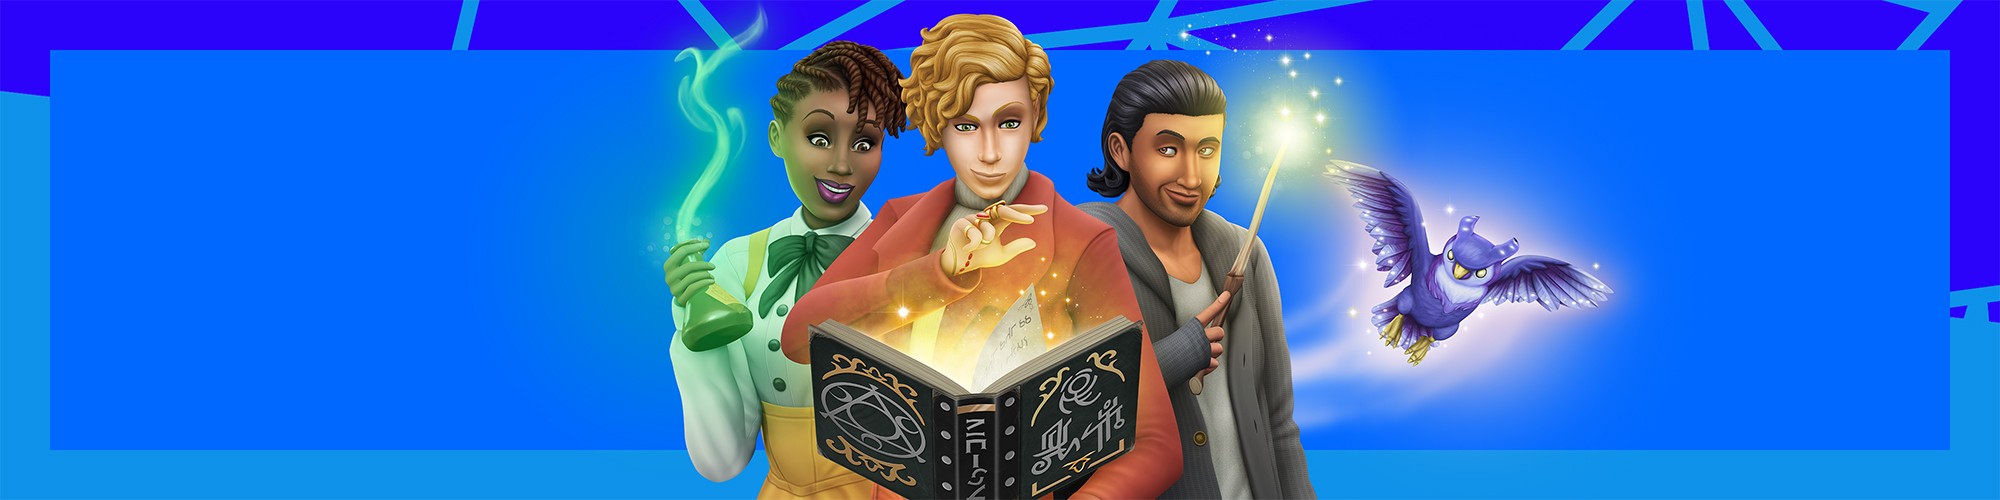 Download Sims 4 Strangerville For Mac